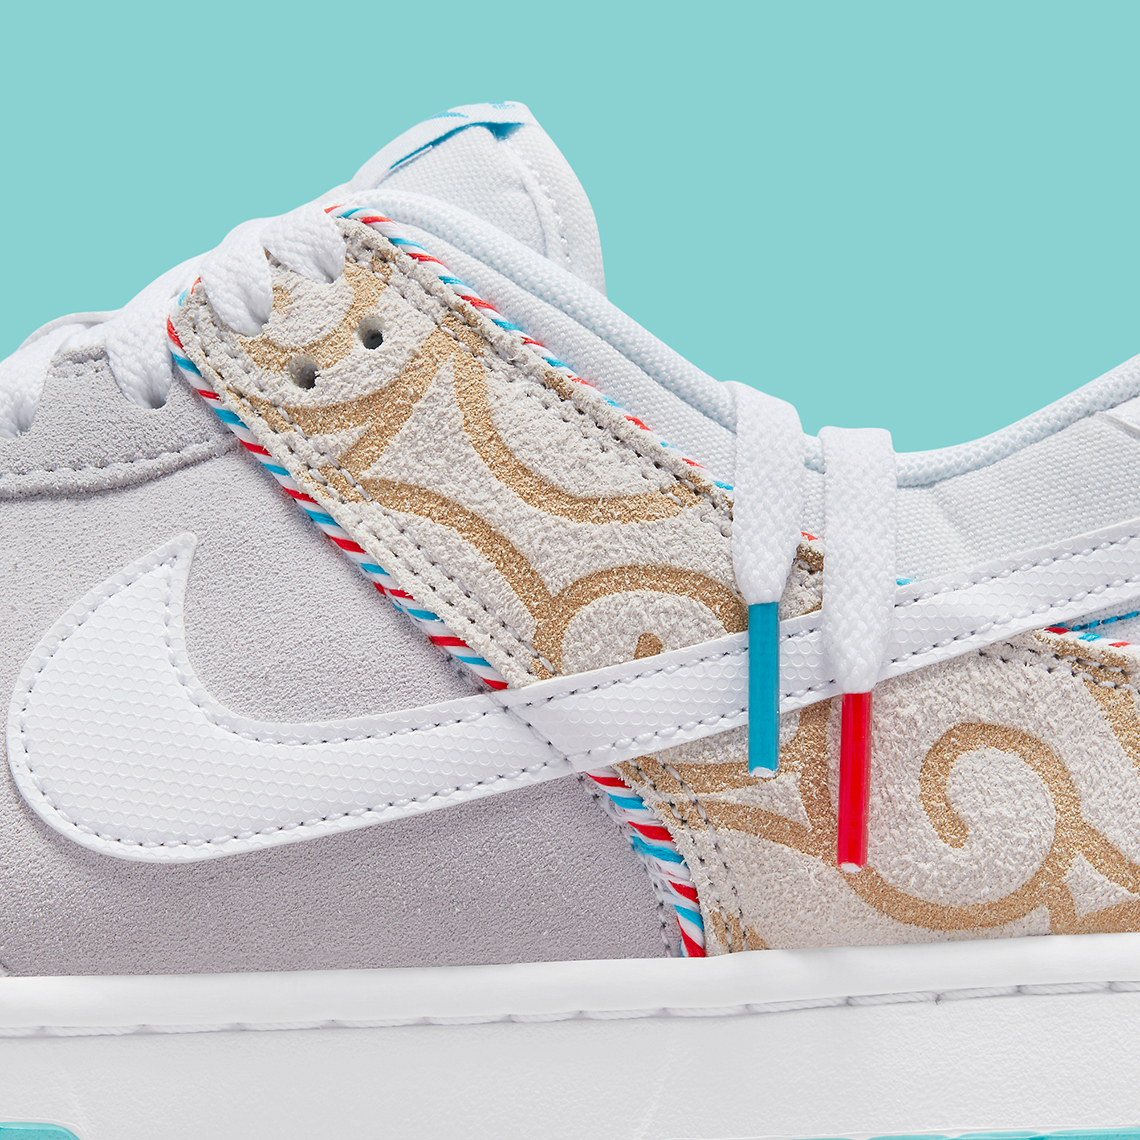 Nike basketball Dunk Low Barber Shop White DH7614 500 8